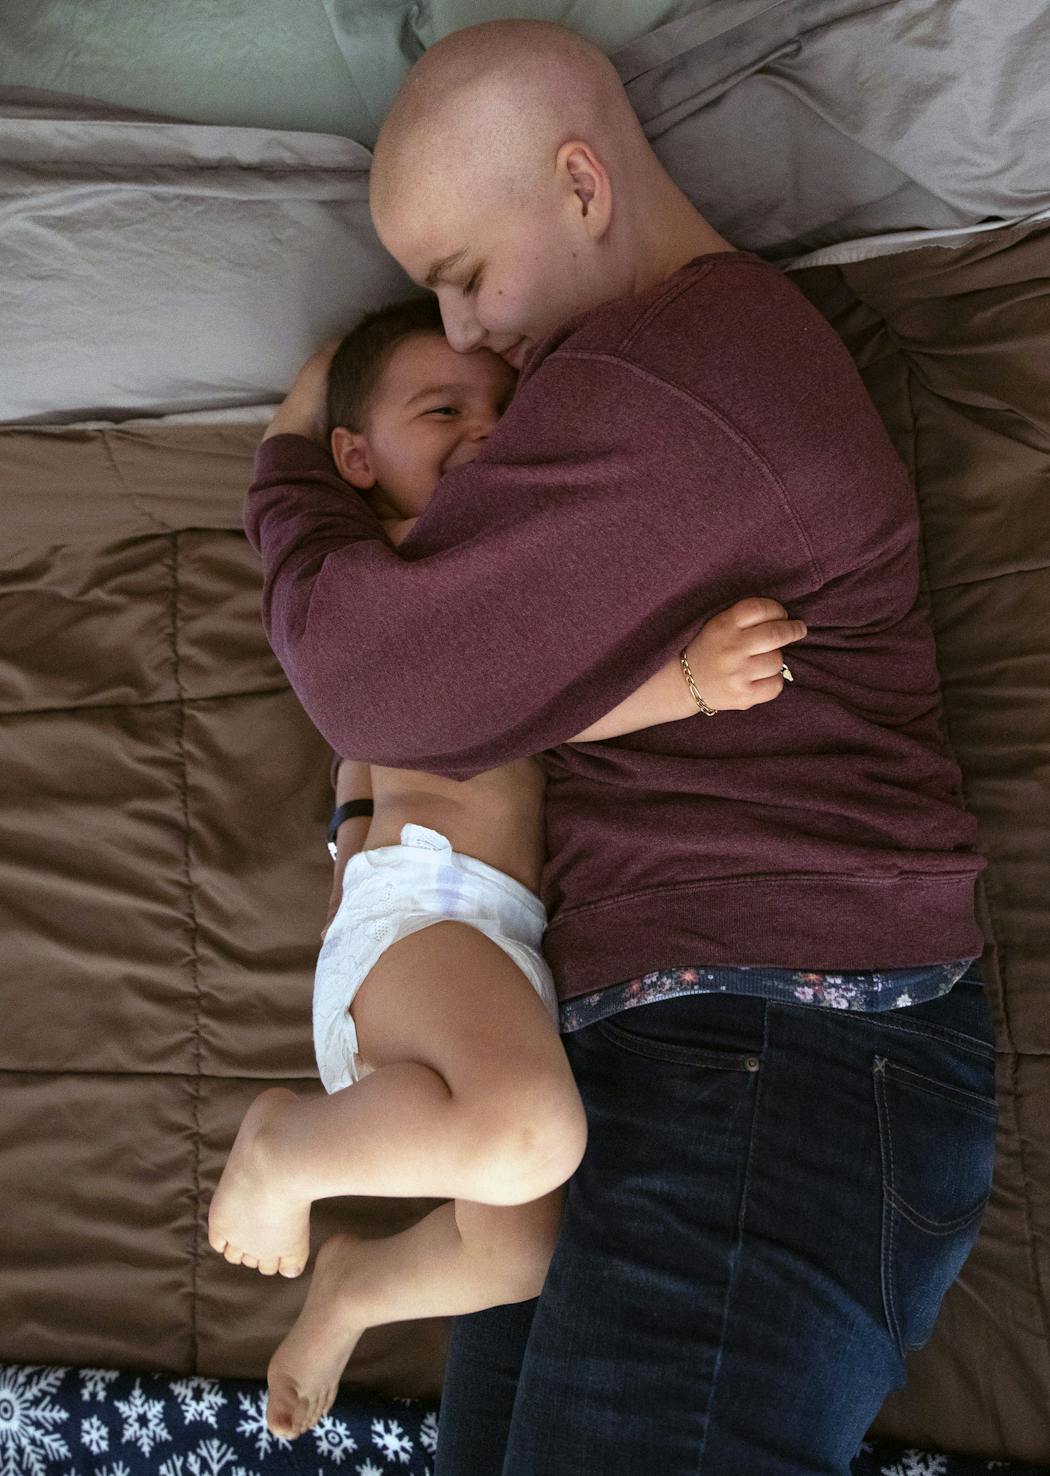 After being away from home for months, being able to crash in her own bed was the one thing Taylor was looking forward to the most. While laying down, Solomon decided to crawl onto the bed and join her, even if it was just for a few minutes.